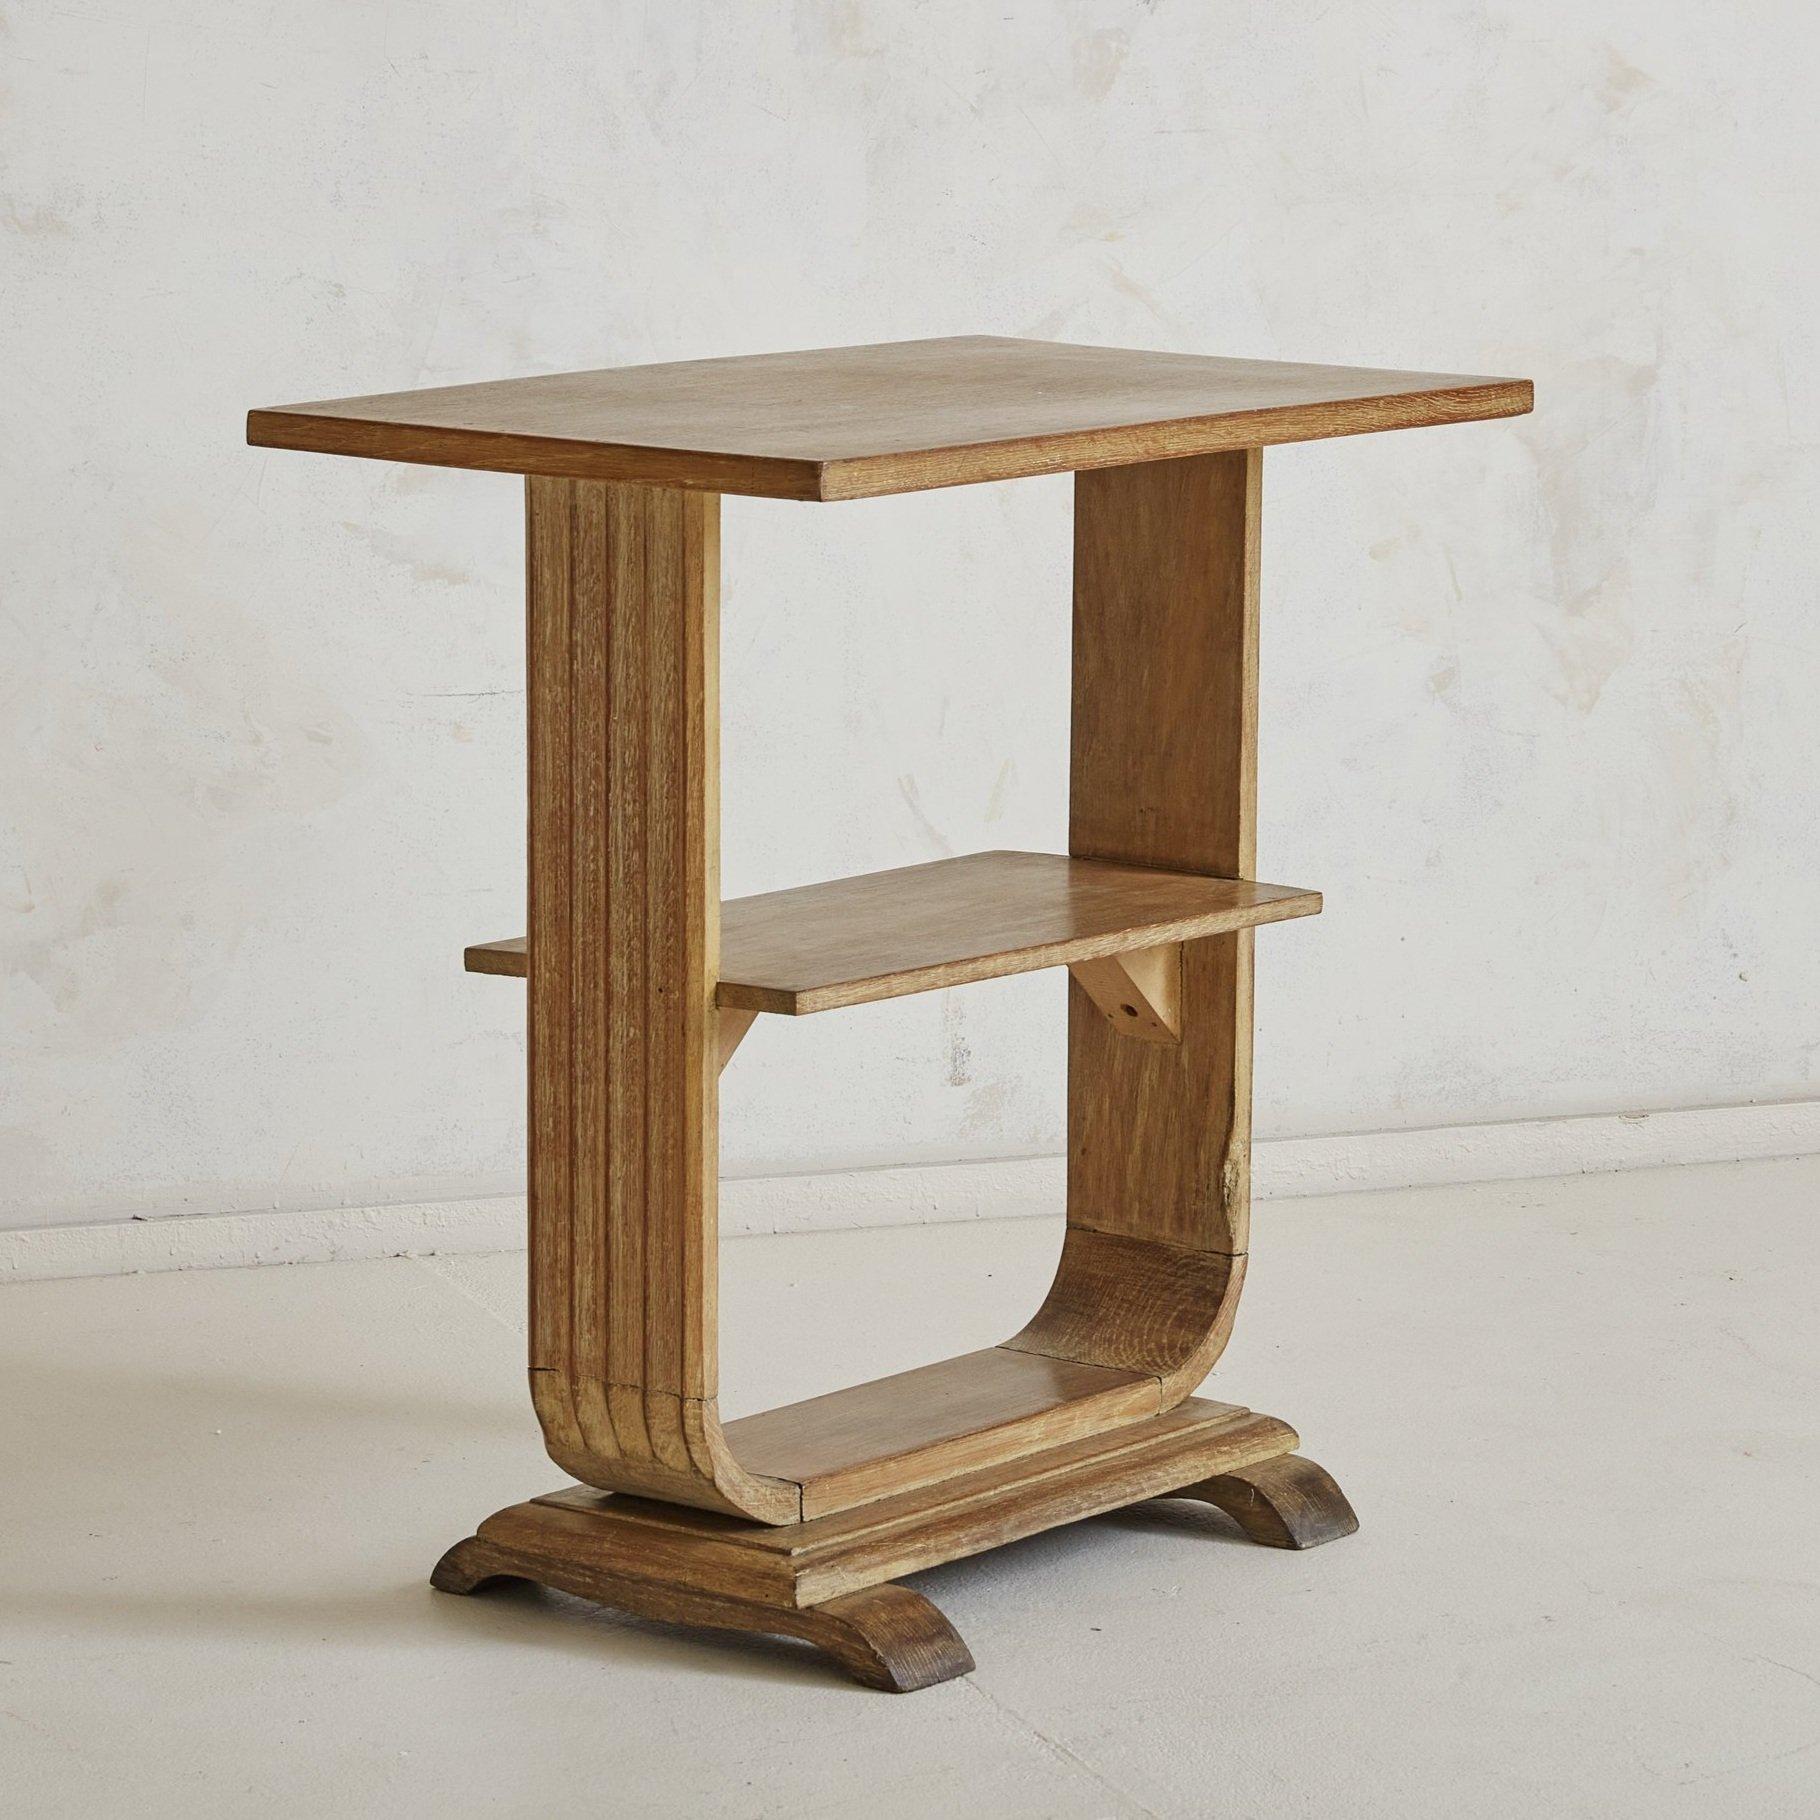 A French Art Deco small wood side table from the 1940s. This side table features three rectangular shelves, a “U” shaped tulip frame with column detailing, and two curved legs at the base. The wood has textured graining throughout with varying